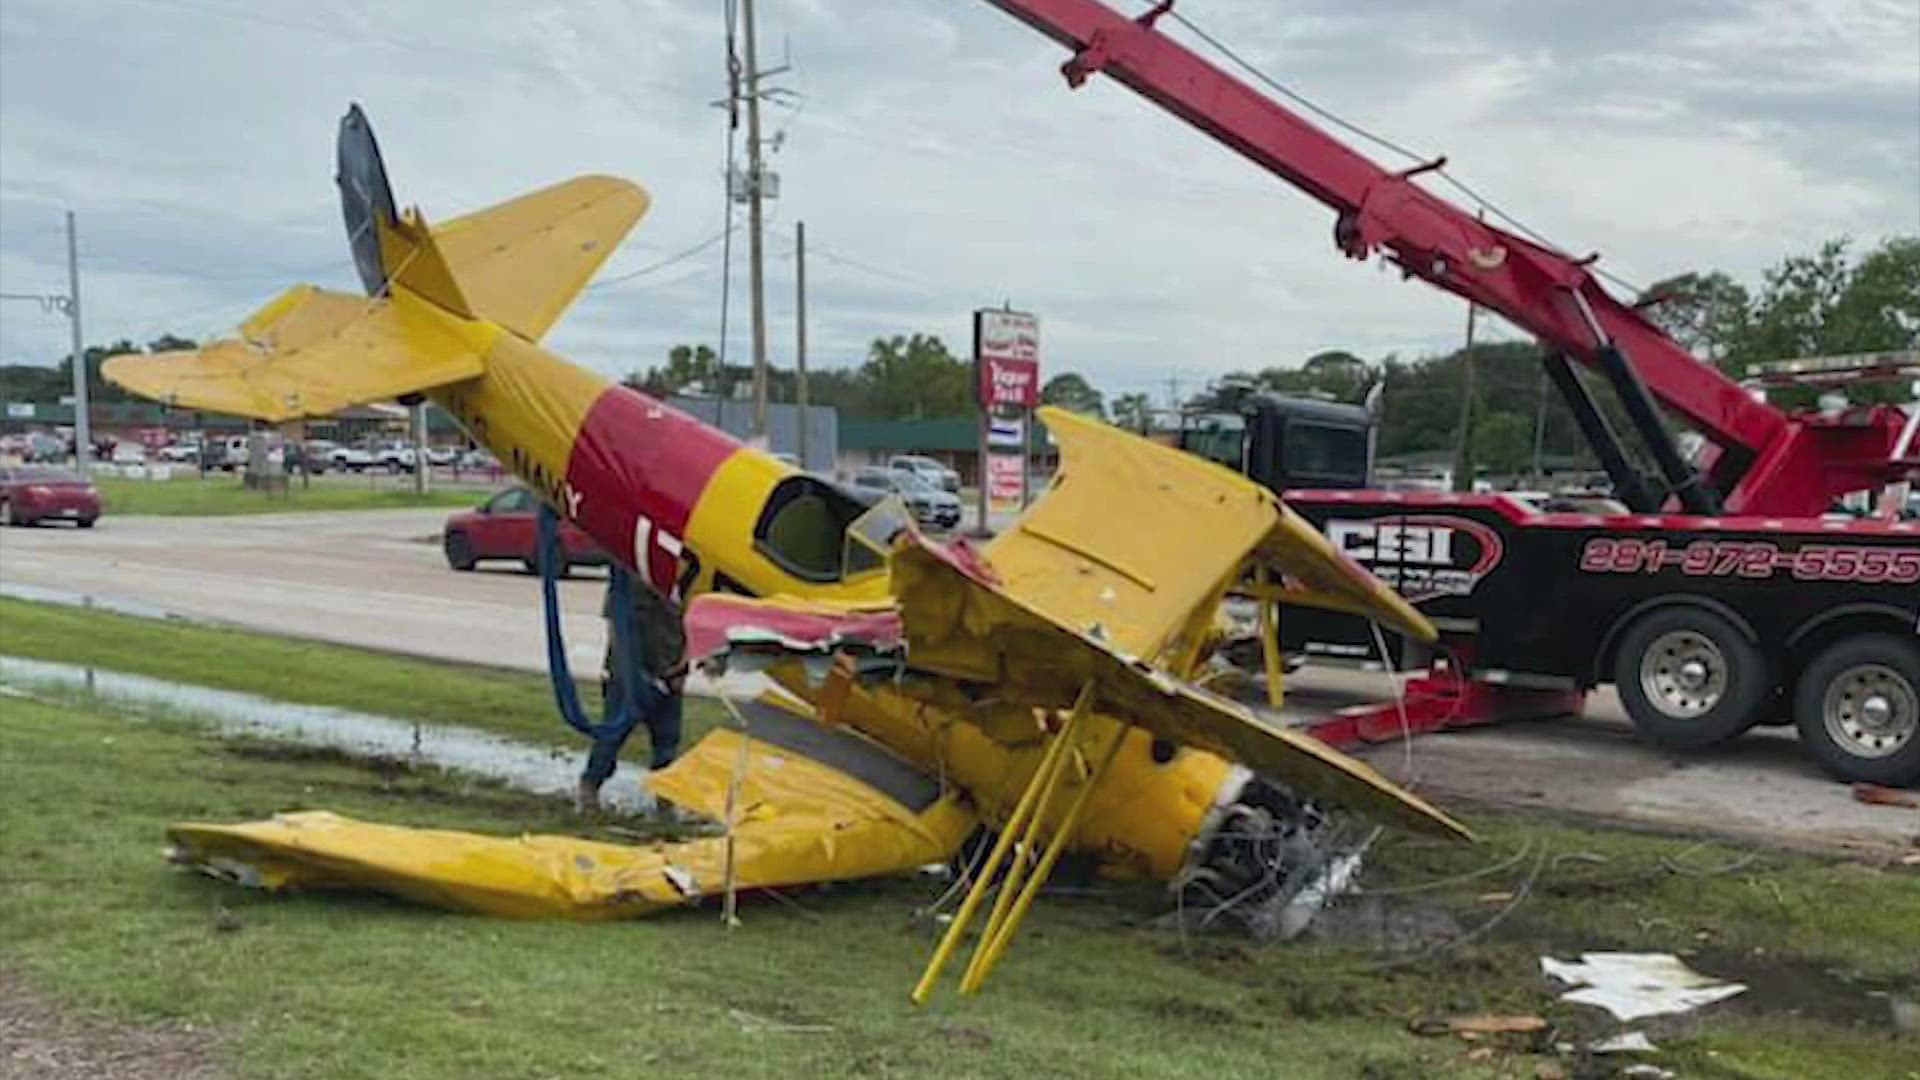 A photo provided by the Chambers County Sheriff’s Office shows the damage. The photo shows a yellow plane overturned alongside the highway.